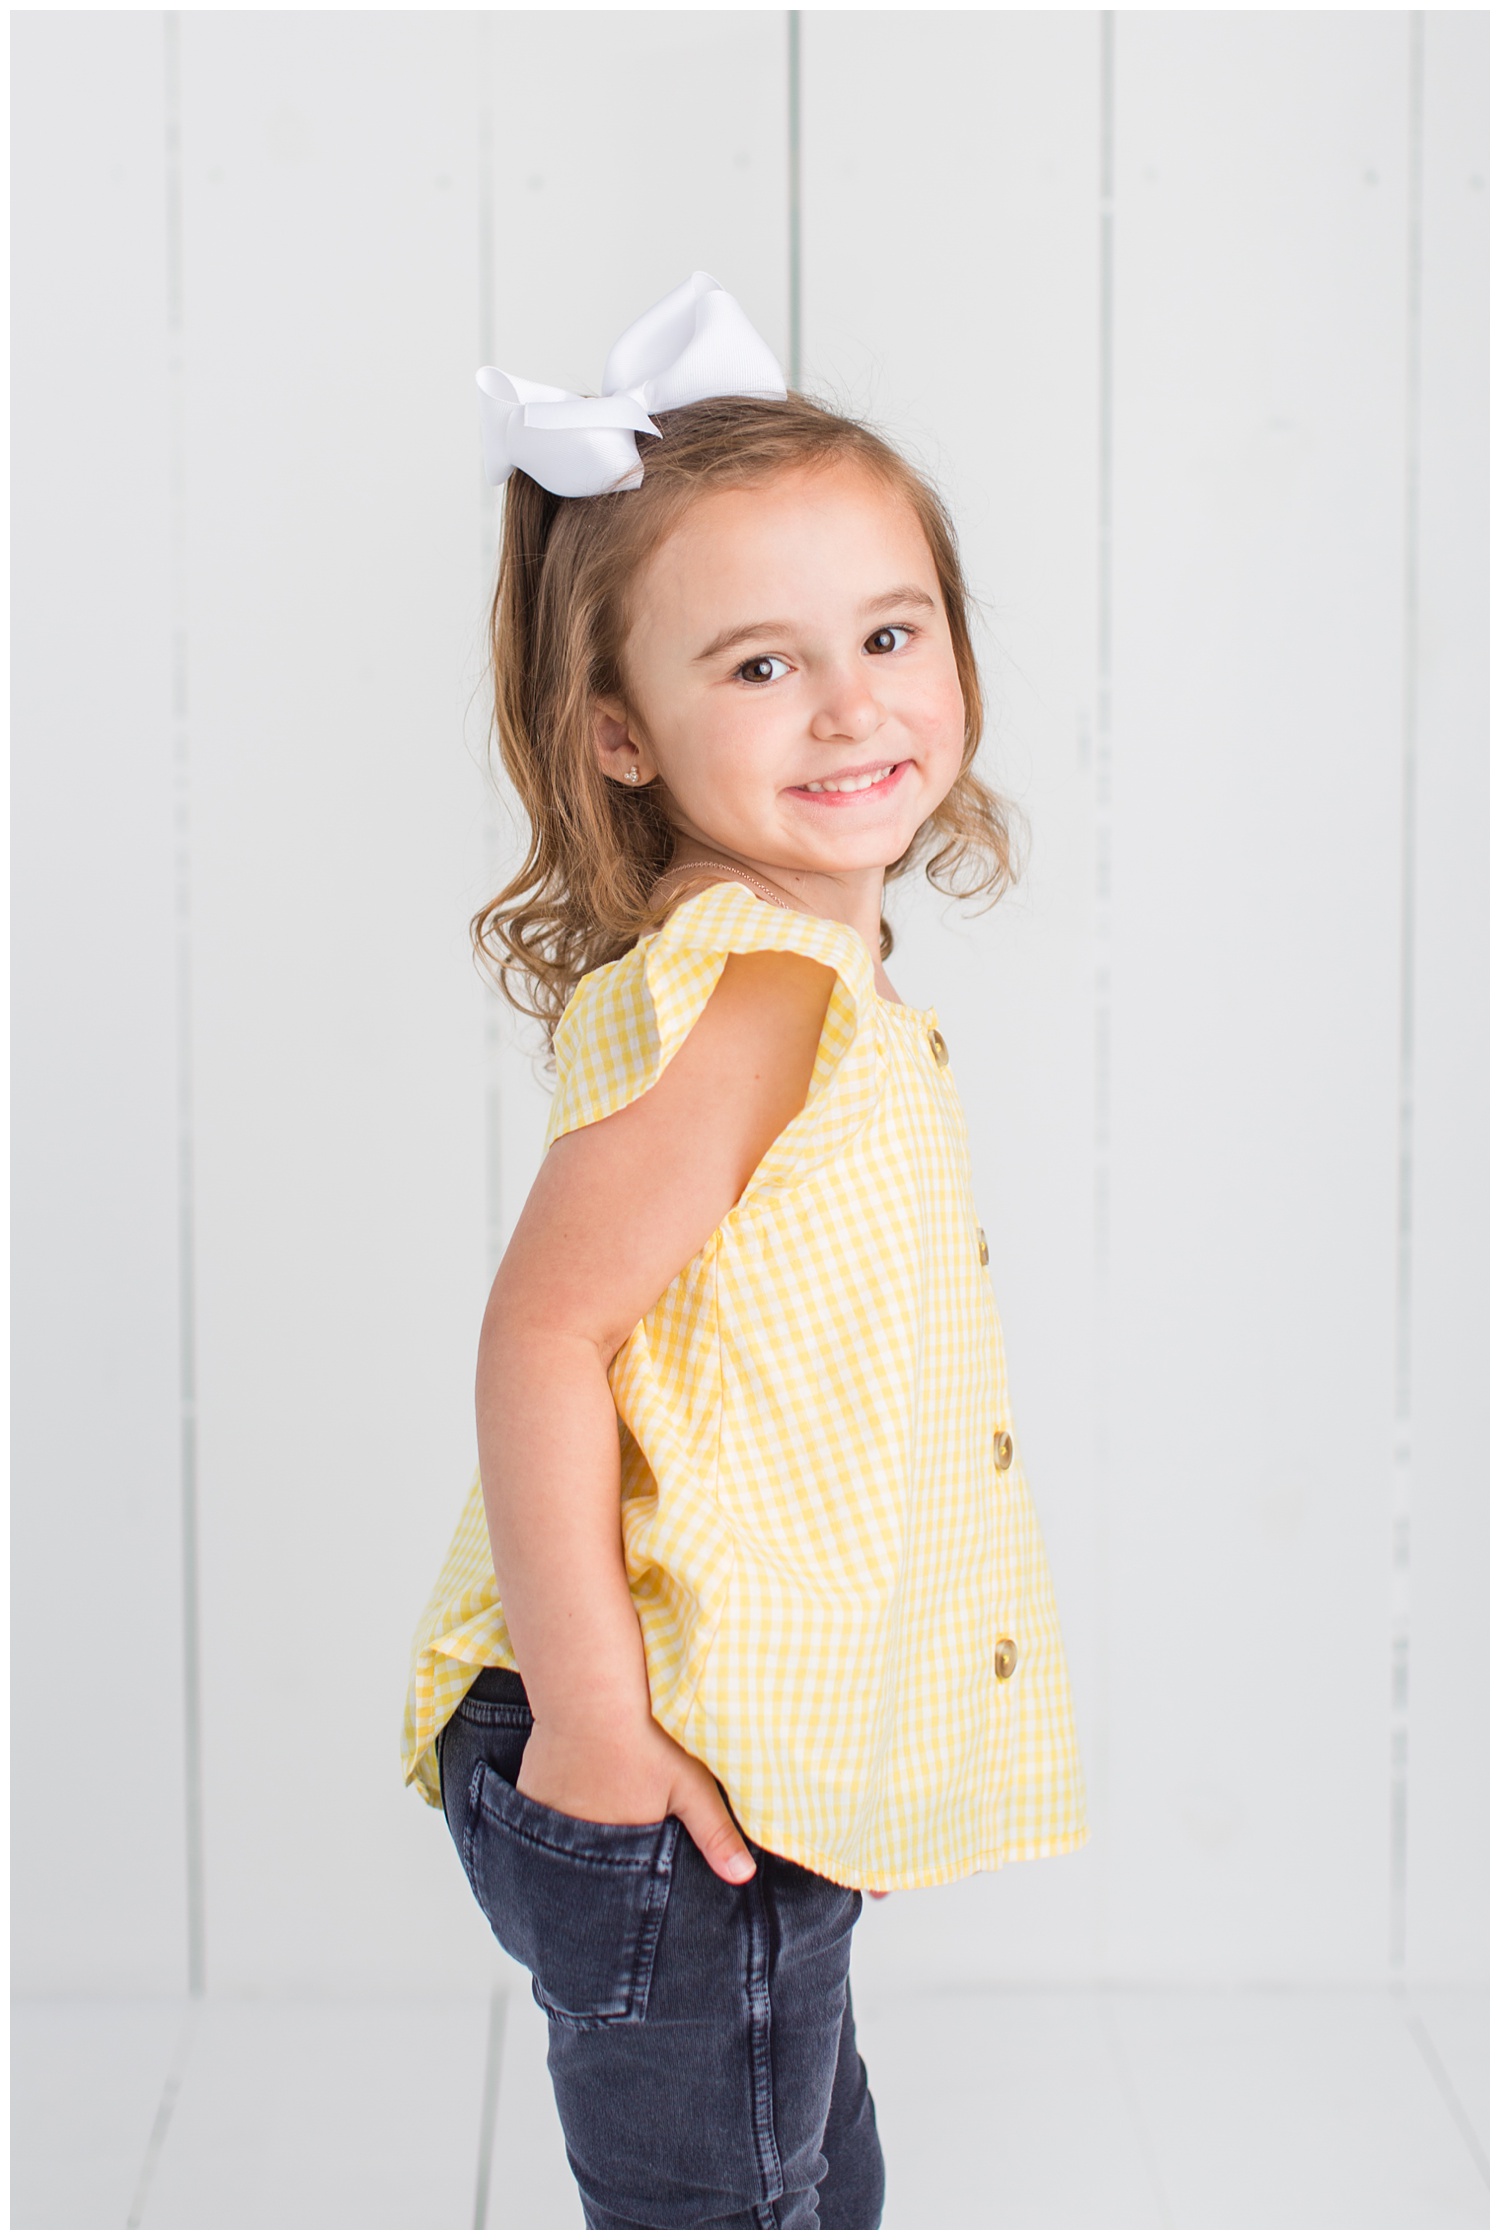 4 Year old Sadie wearing a yellow gingham top posing with her hand in her back pocket on a white wood background.